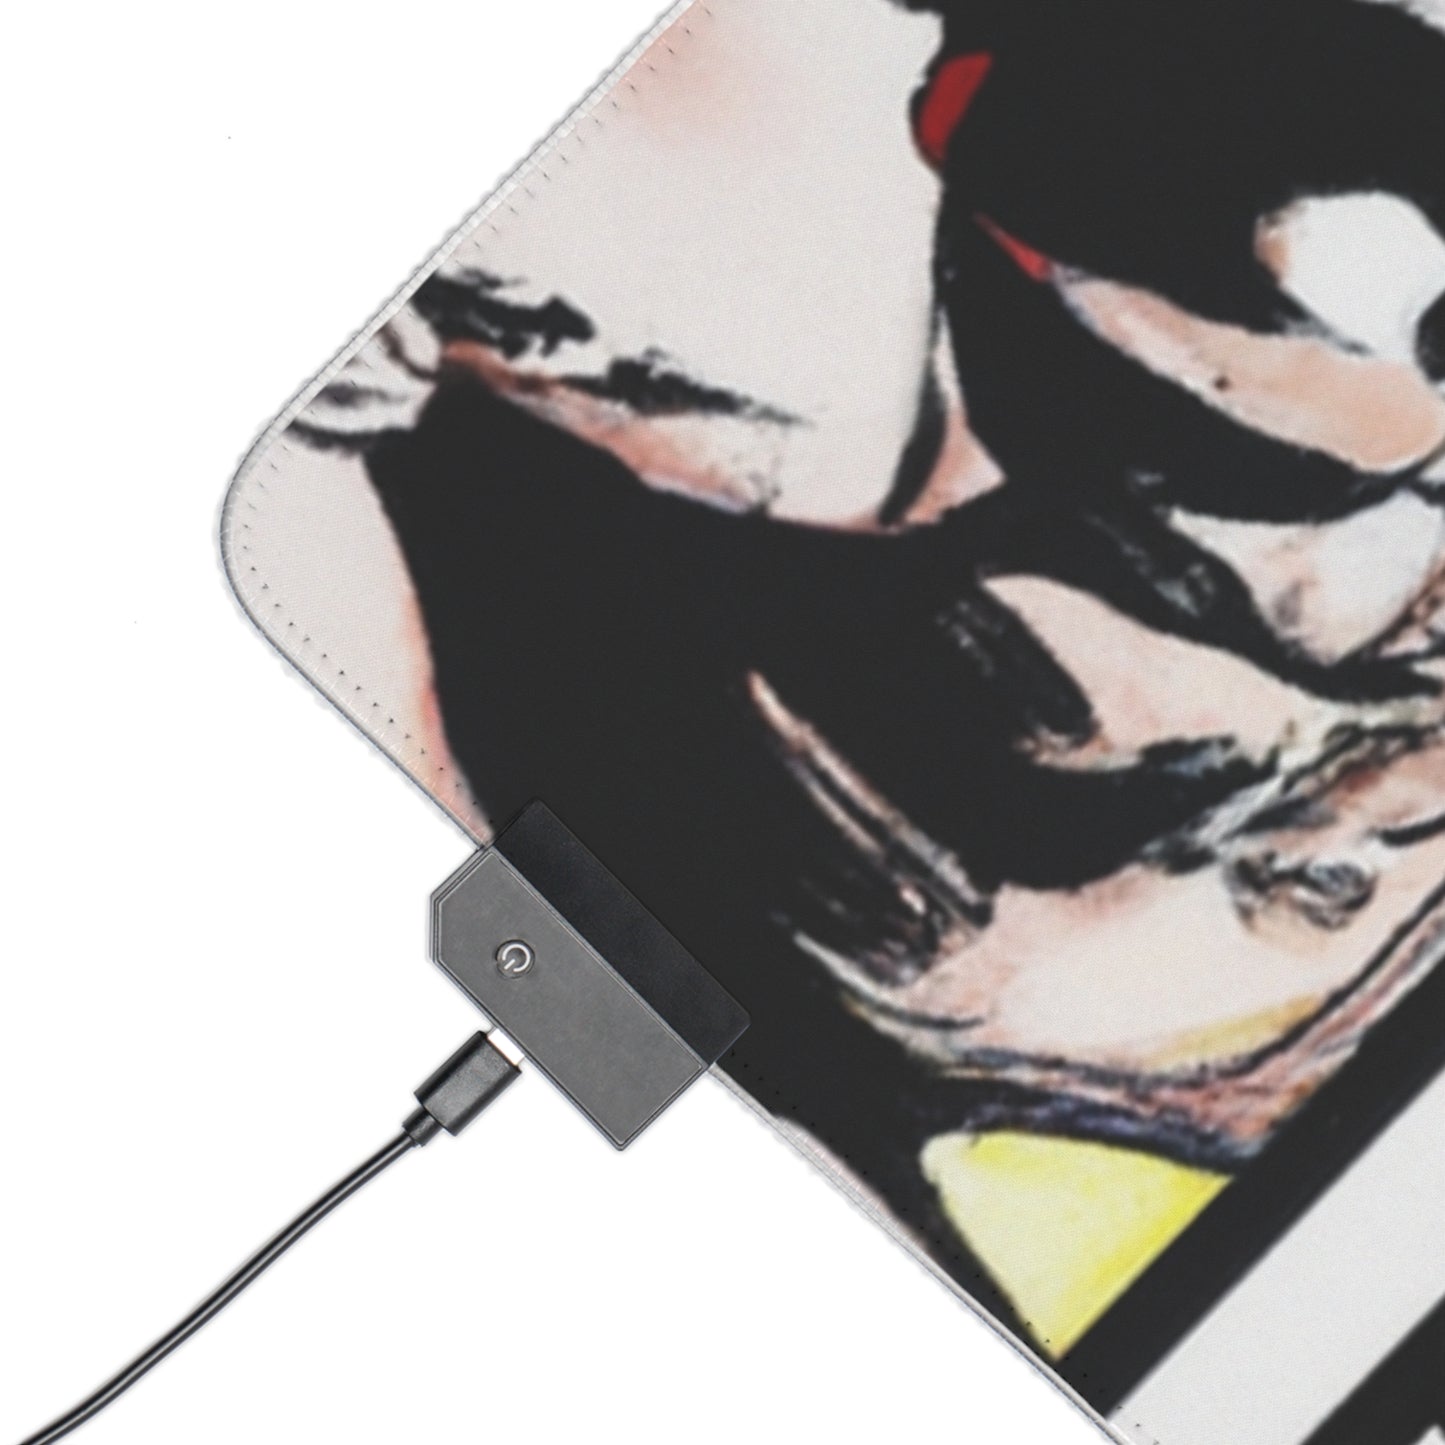 Spike Salvo - Comic Book Collector LED Light Up Gaming Mouse Pad